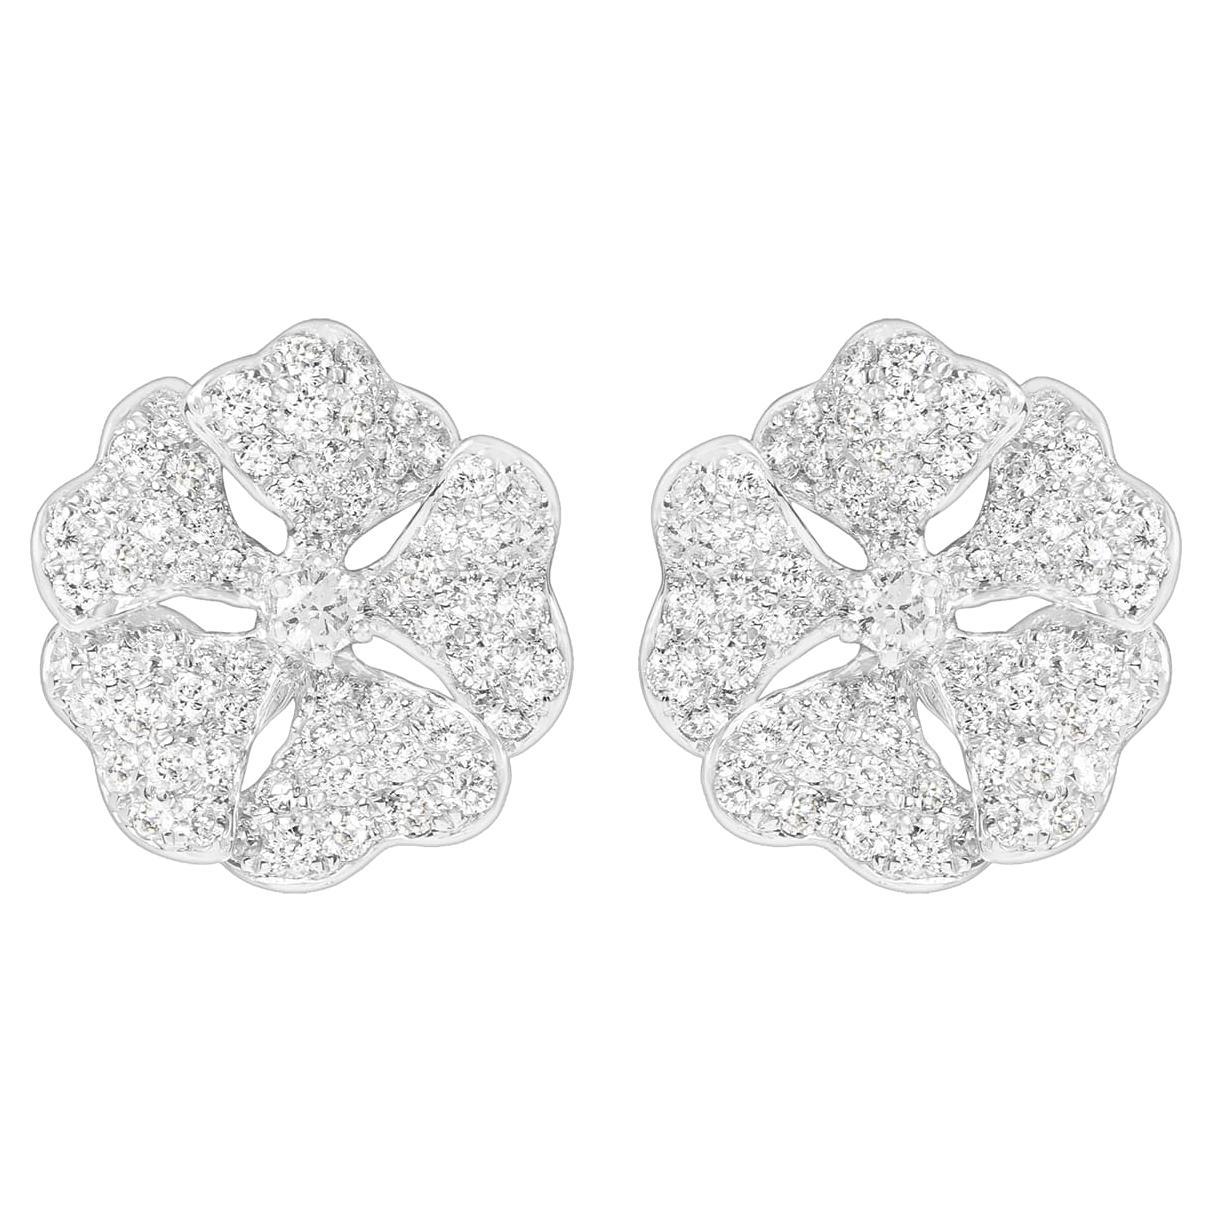 Bloom Gold and Pavé Diamond Small Stud Earrings in 18k White Gold